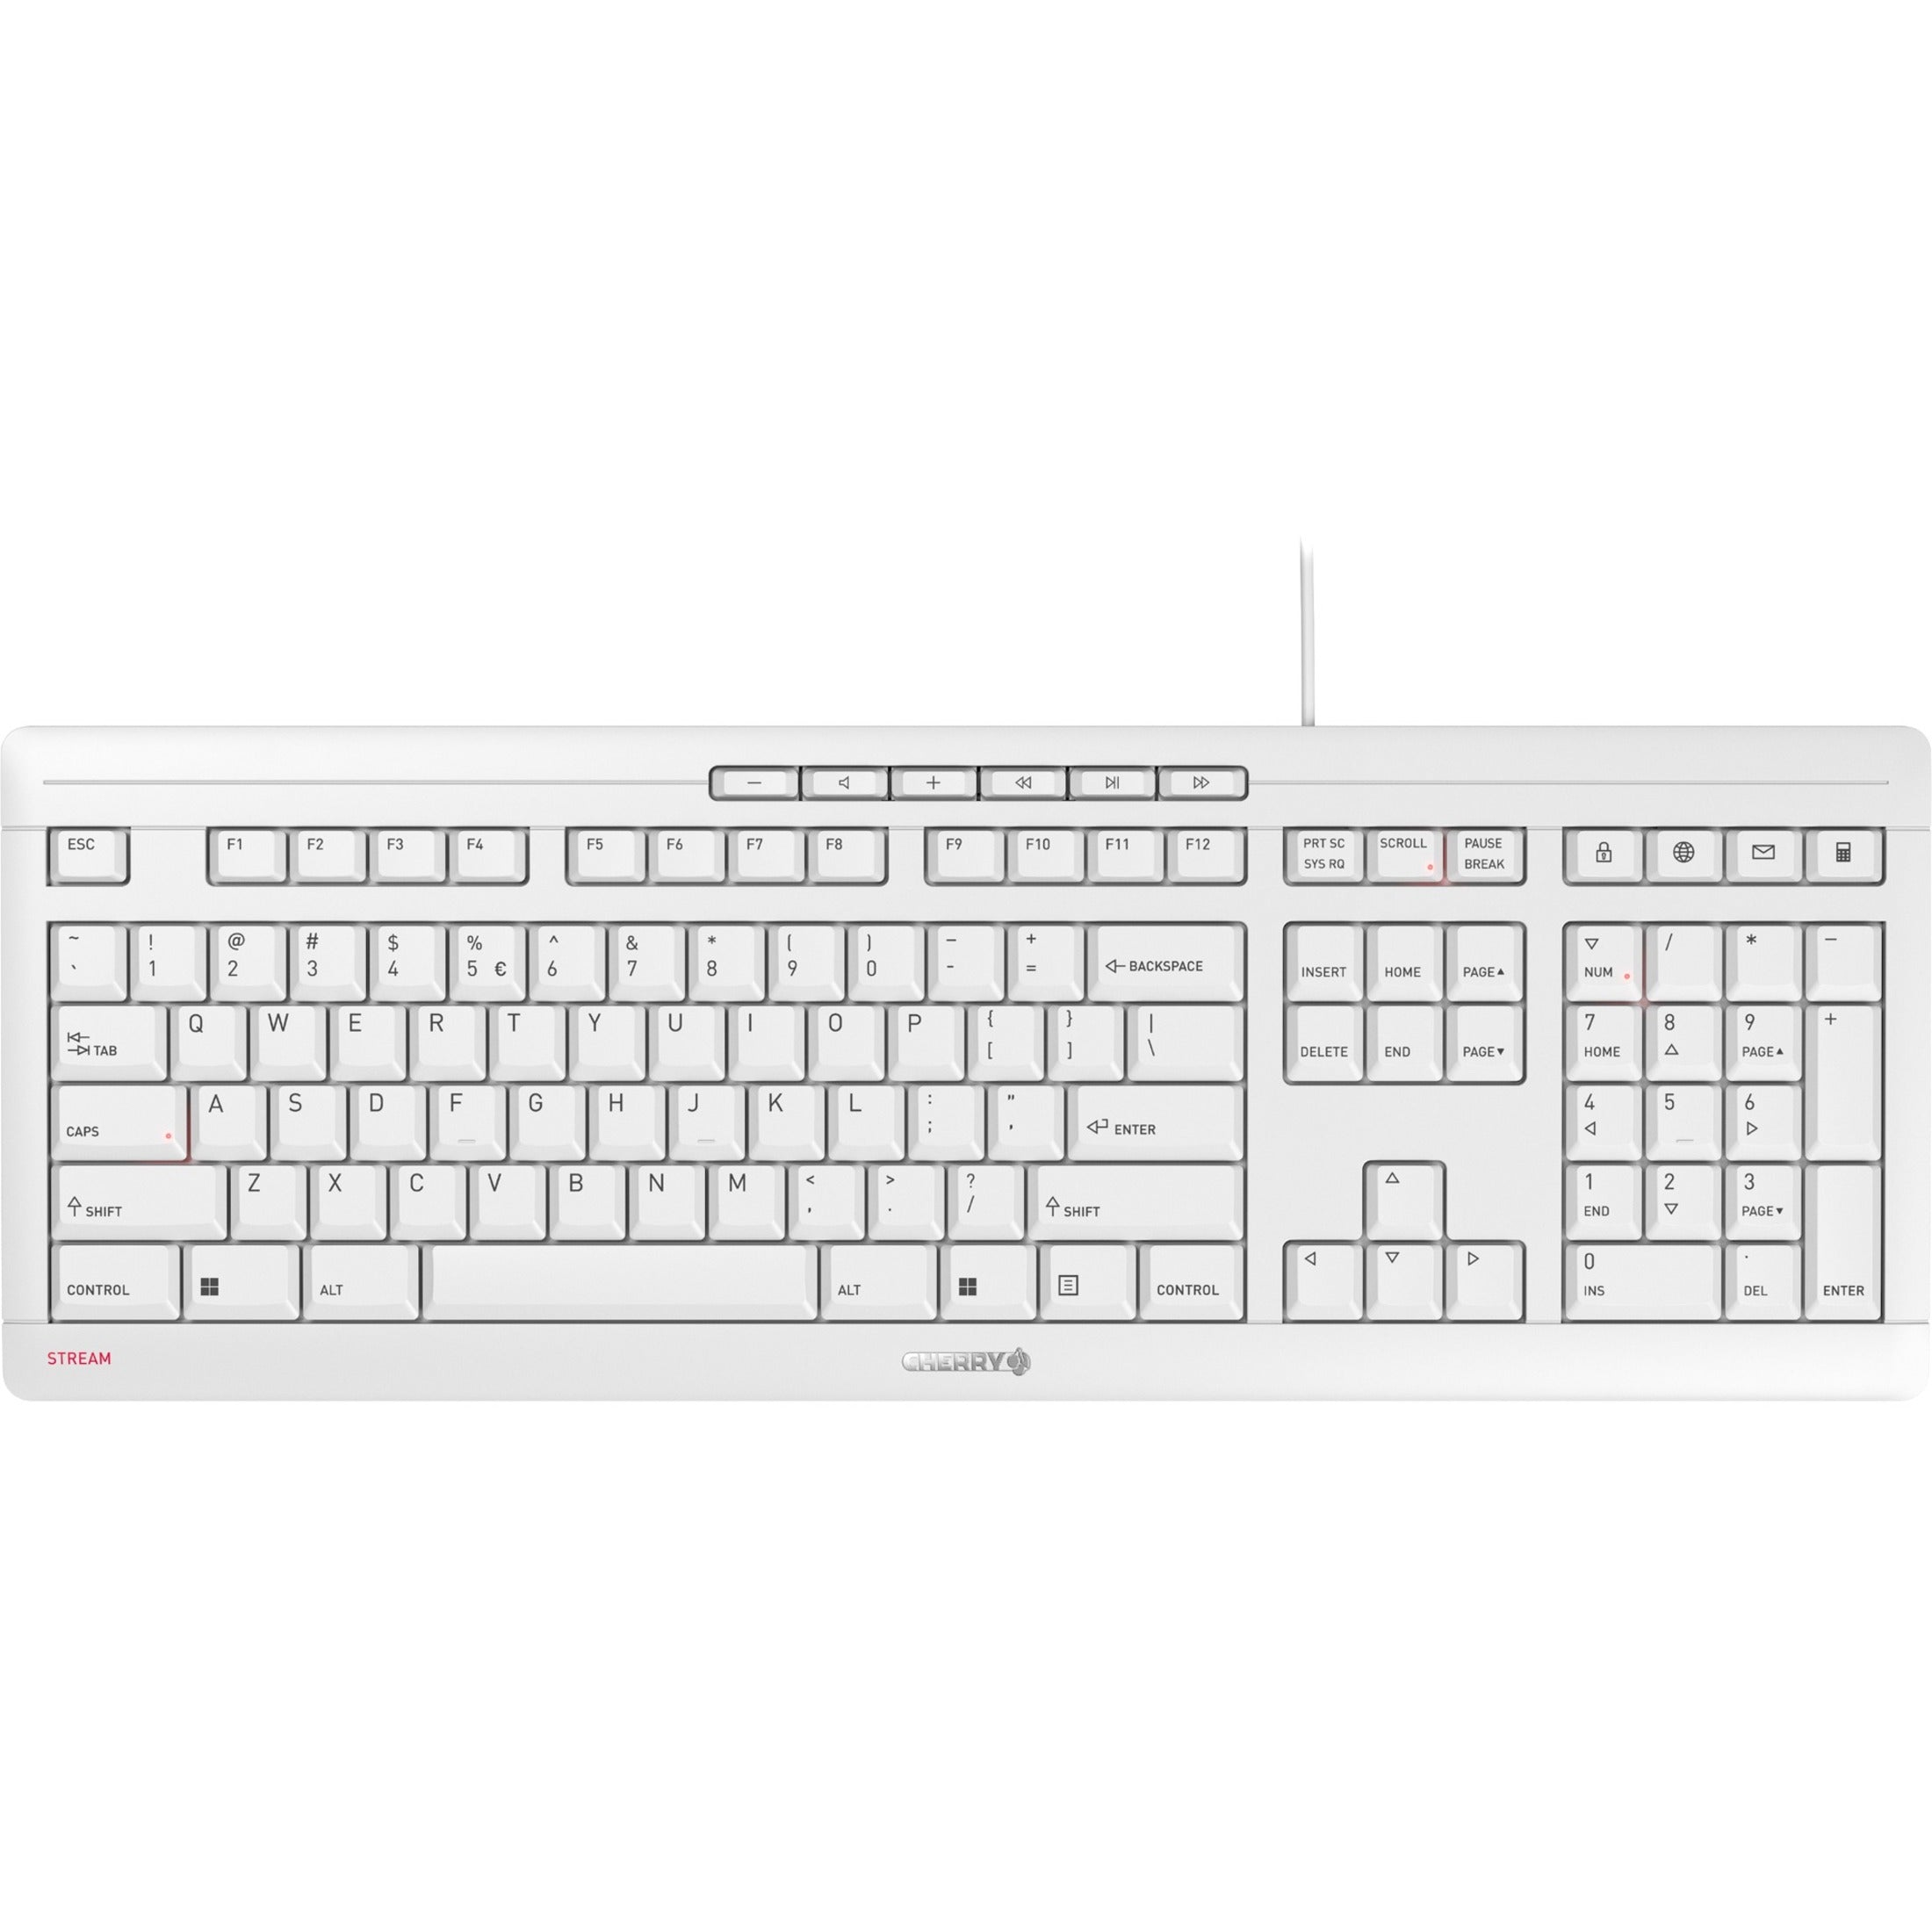 CHERRY JK-8500GB-0 STREAM Keyboard, Spill Resistant, Abrasion Resistant, USB Connectivity